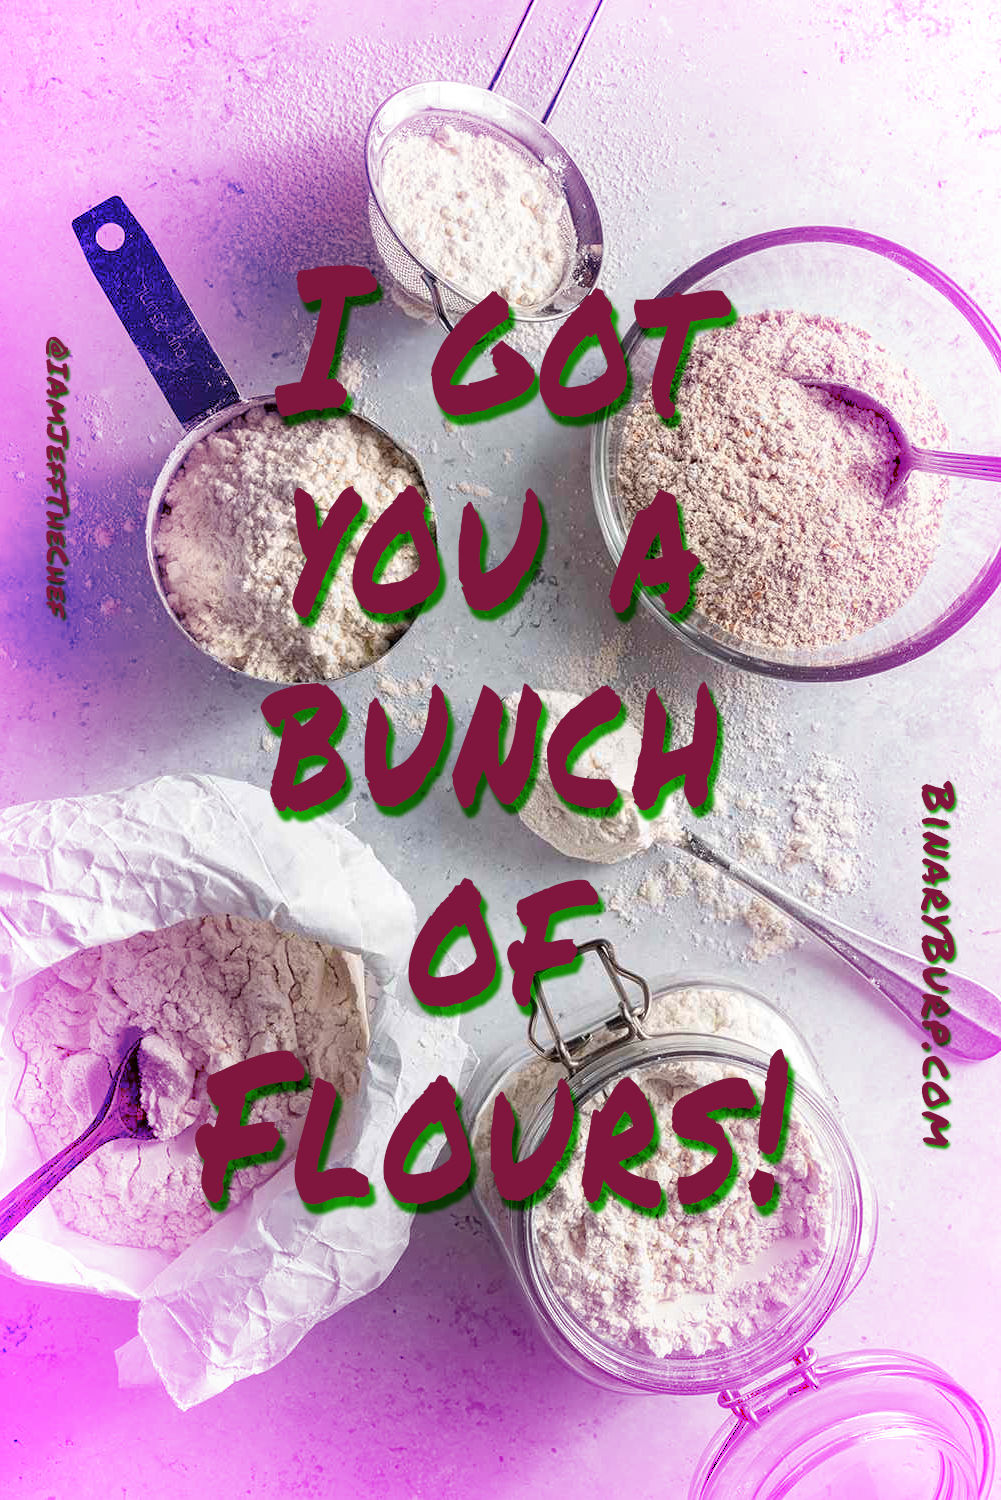 'I got you a bunch of flours'... with a picture of various types of cooking flours!